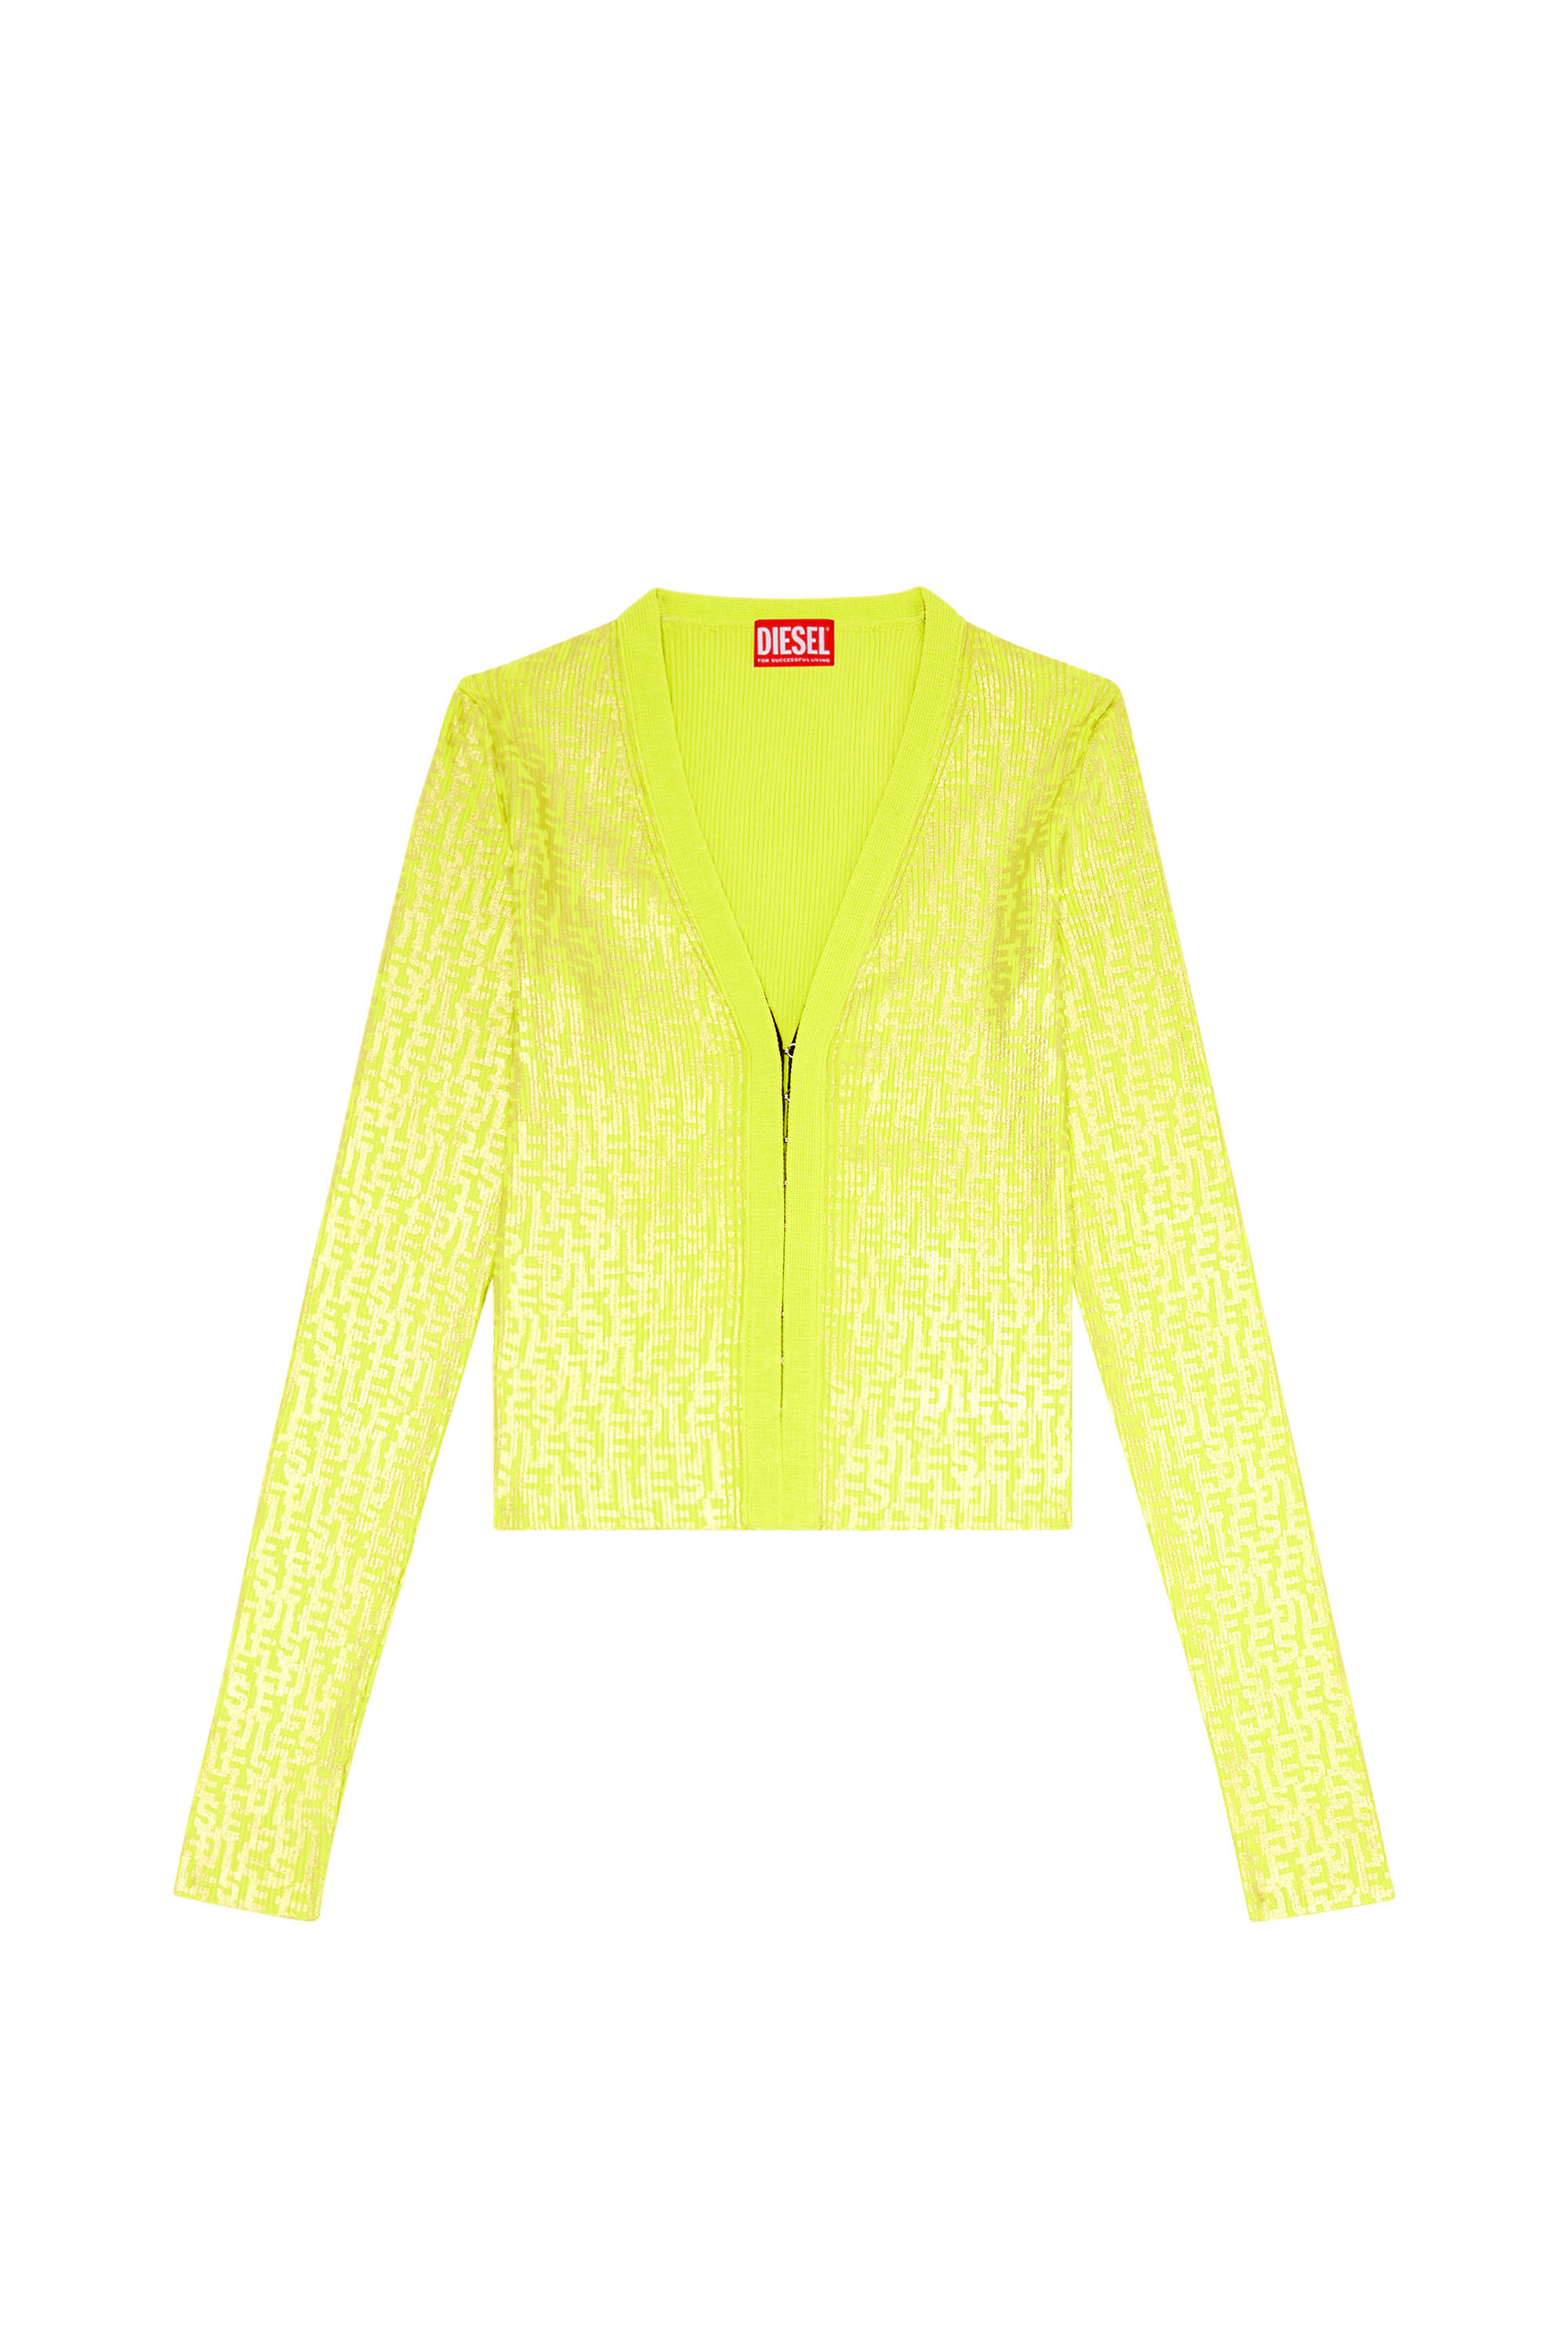 Diesel - M-GRIA, Giallo - Image 2